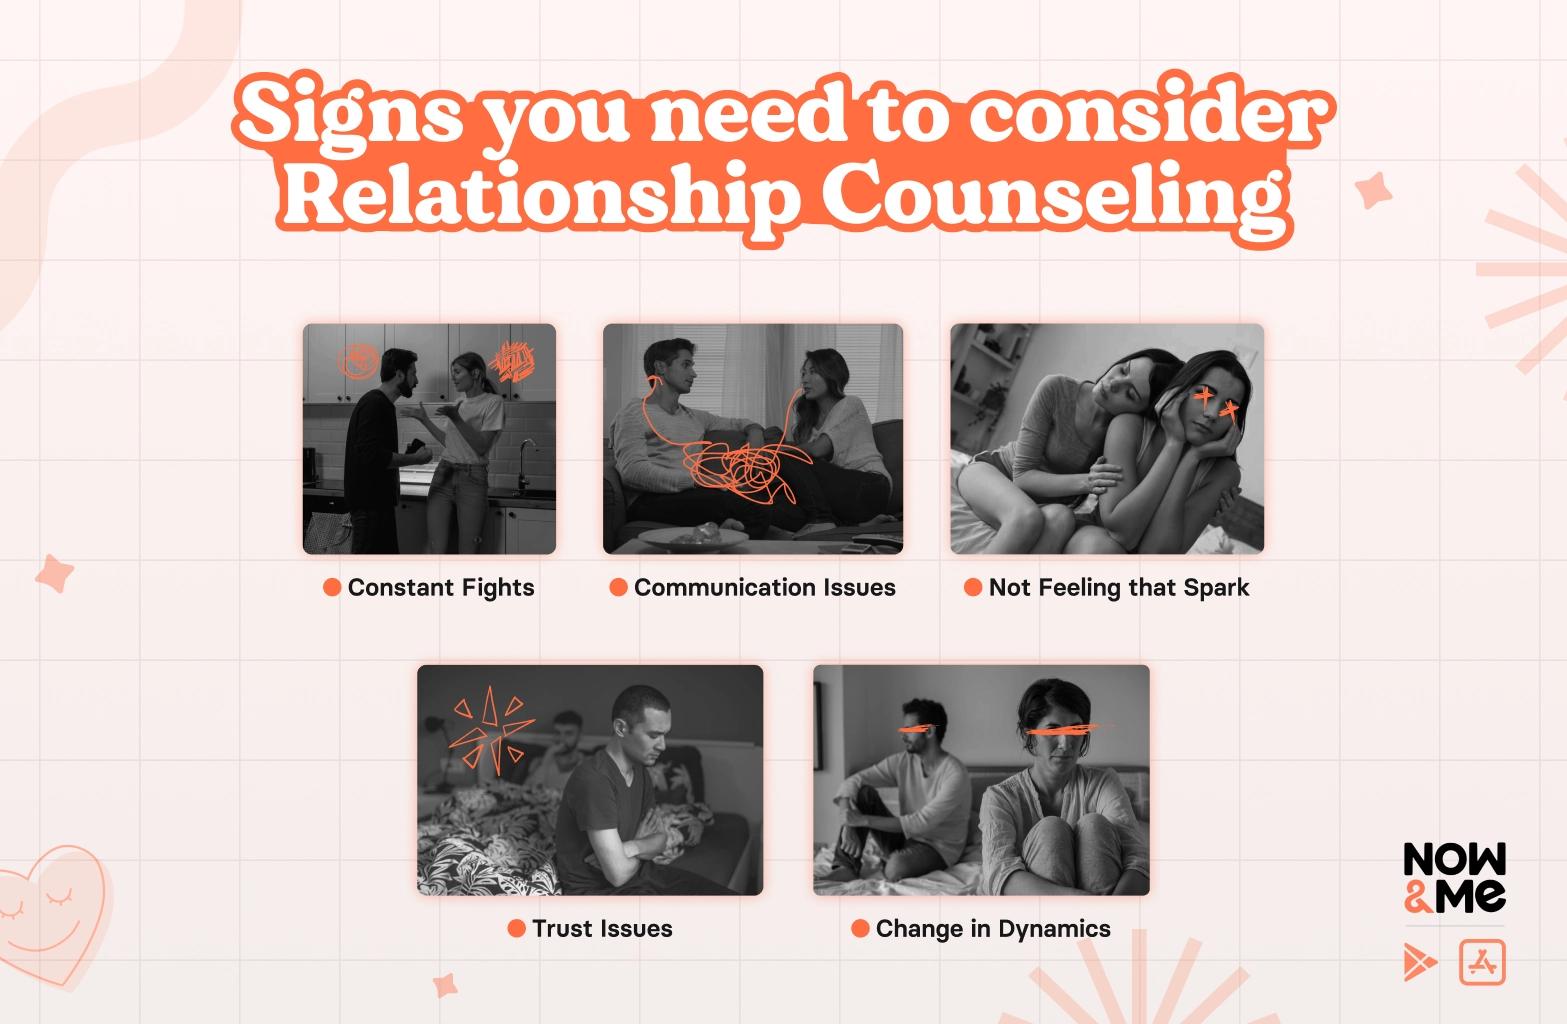 Signs for Relationship Counseling